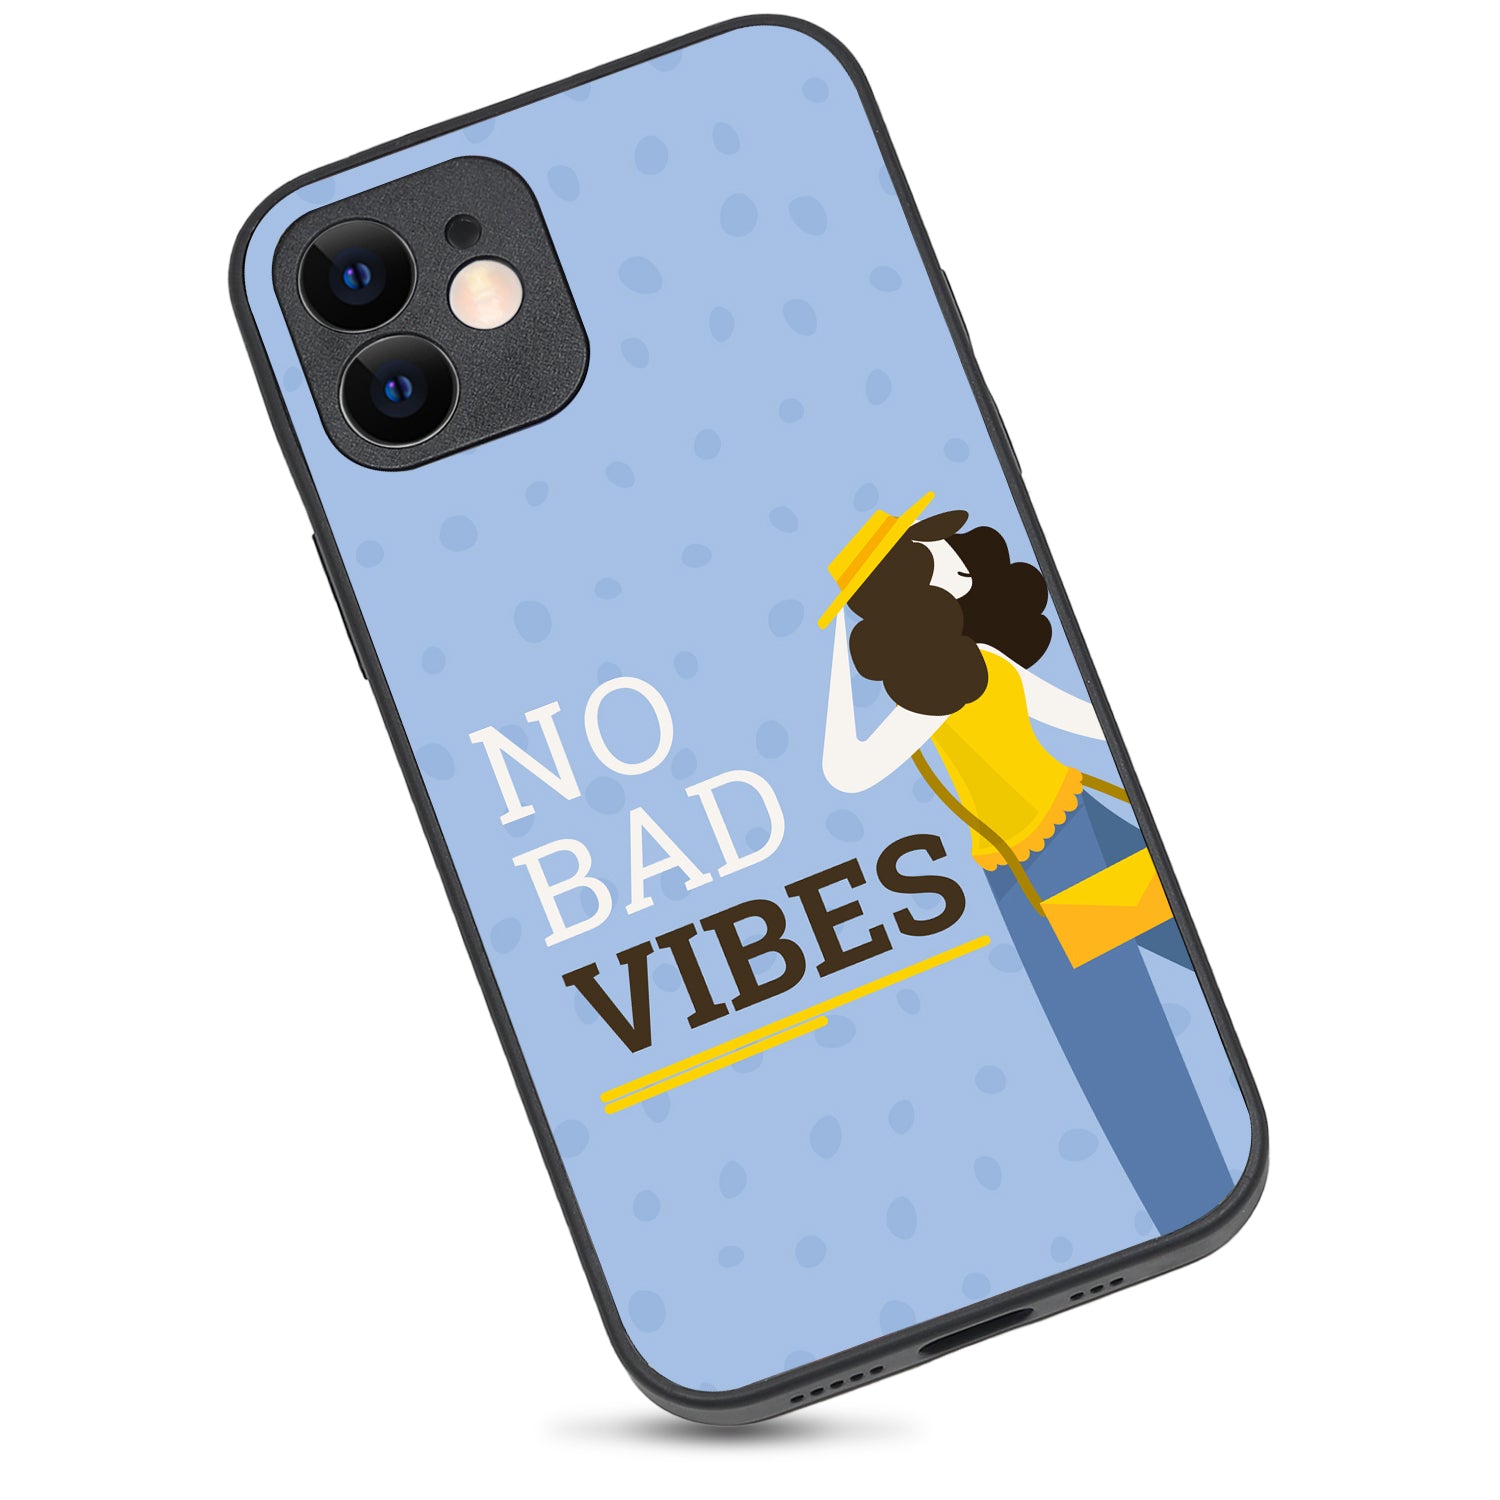 No Bad Vibes Motivational Quotes iPhone 12 Case